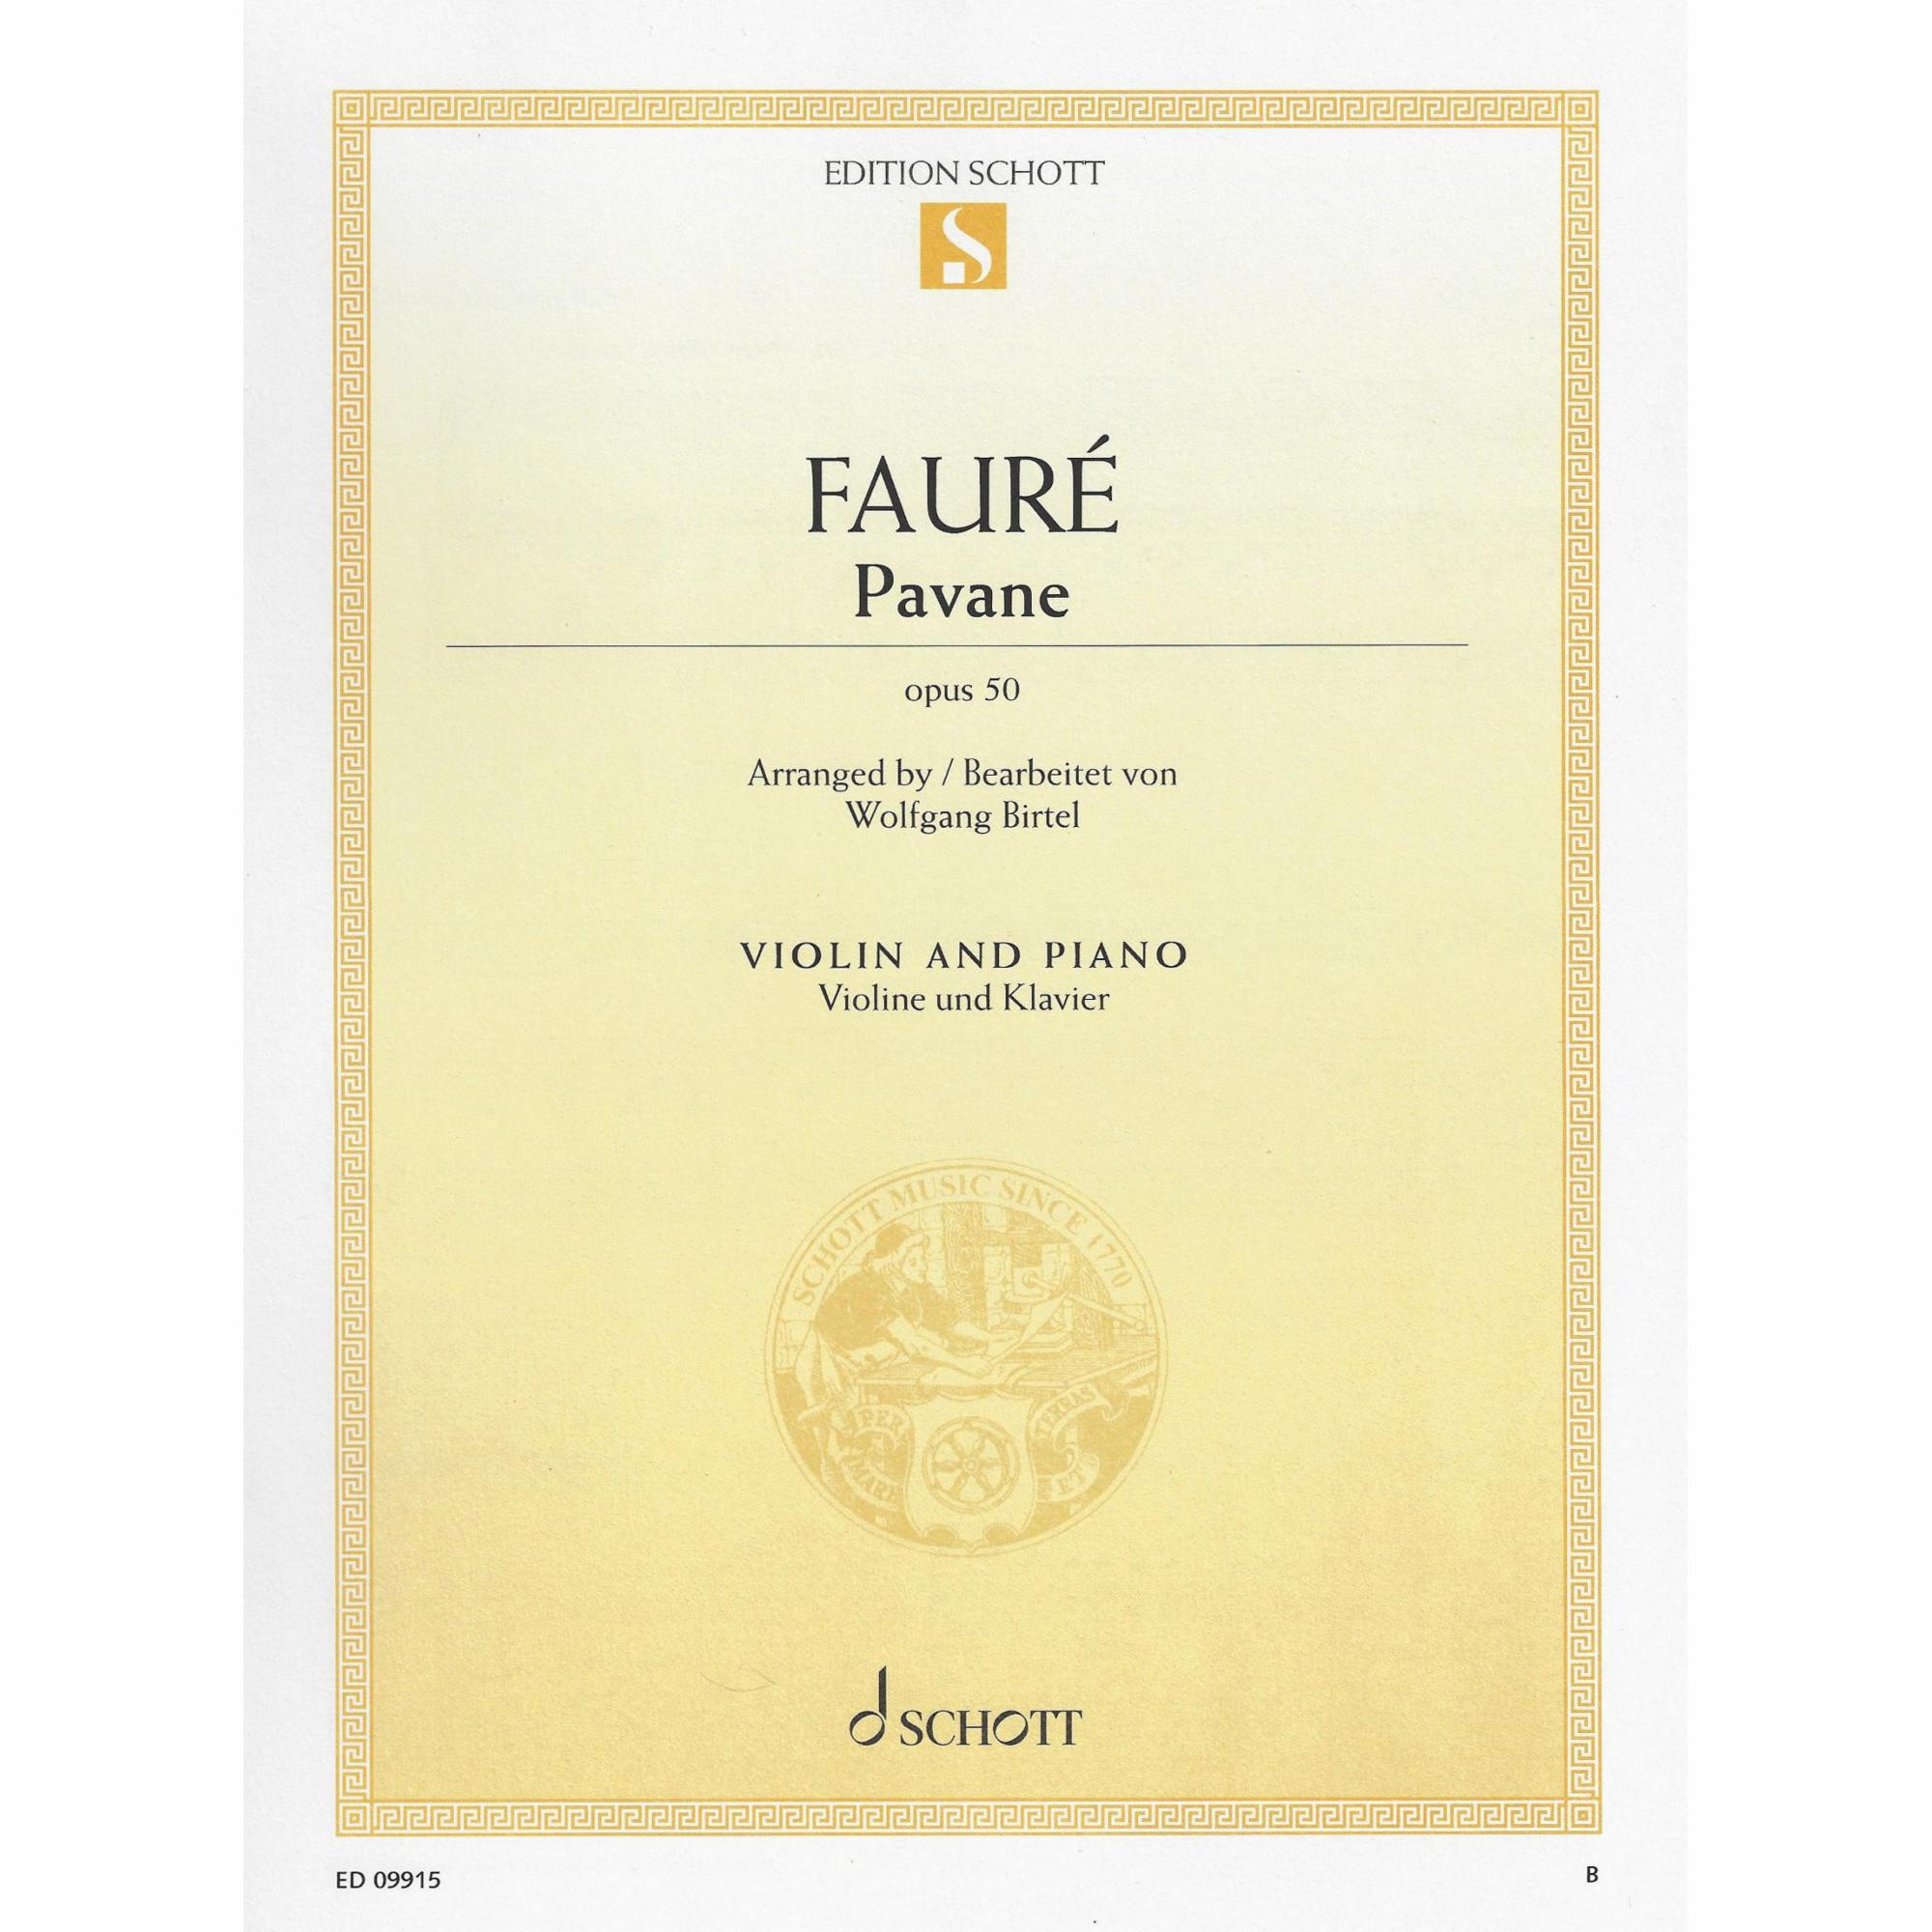 Faure -- Pavane, Op. 50 for Violin and Piano